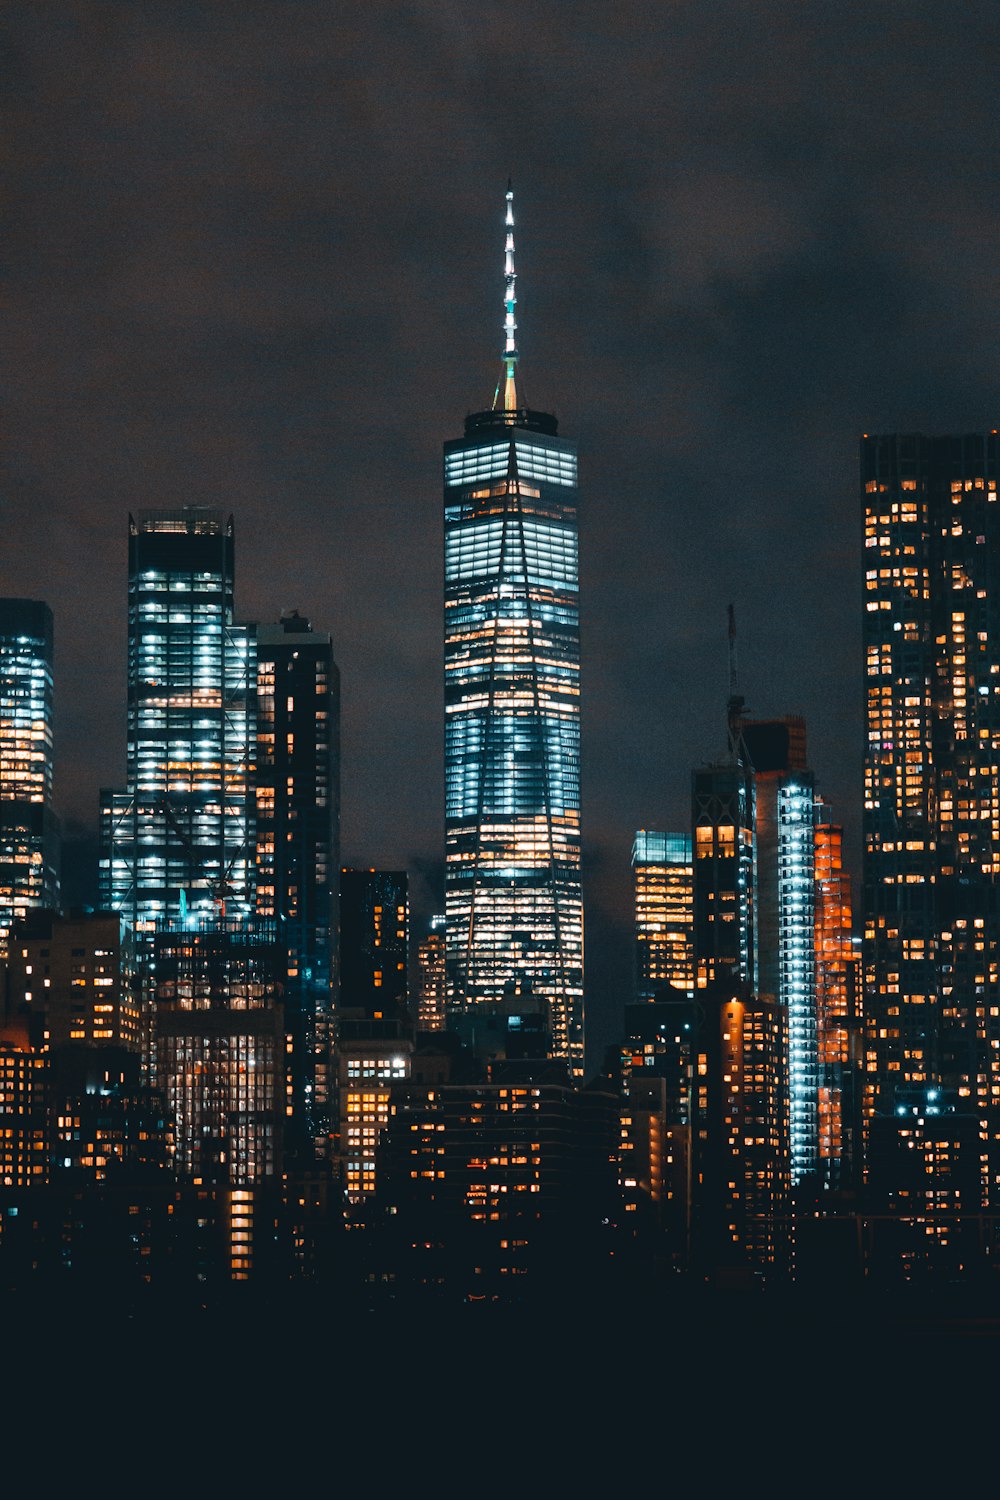 a view of a city skyline at night